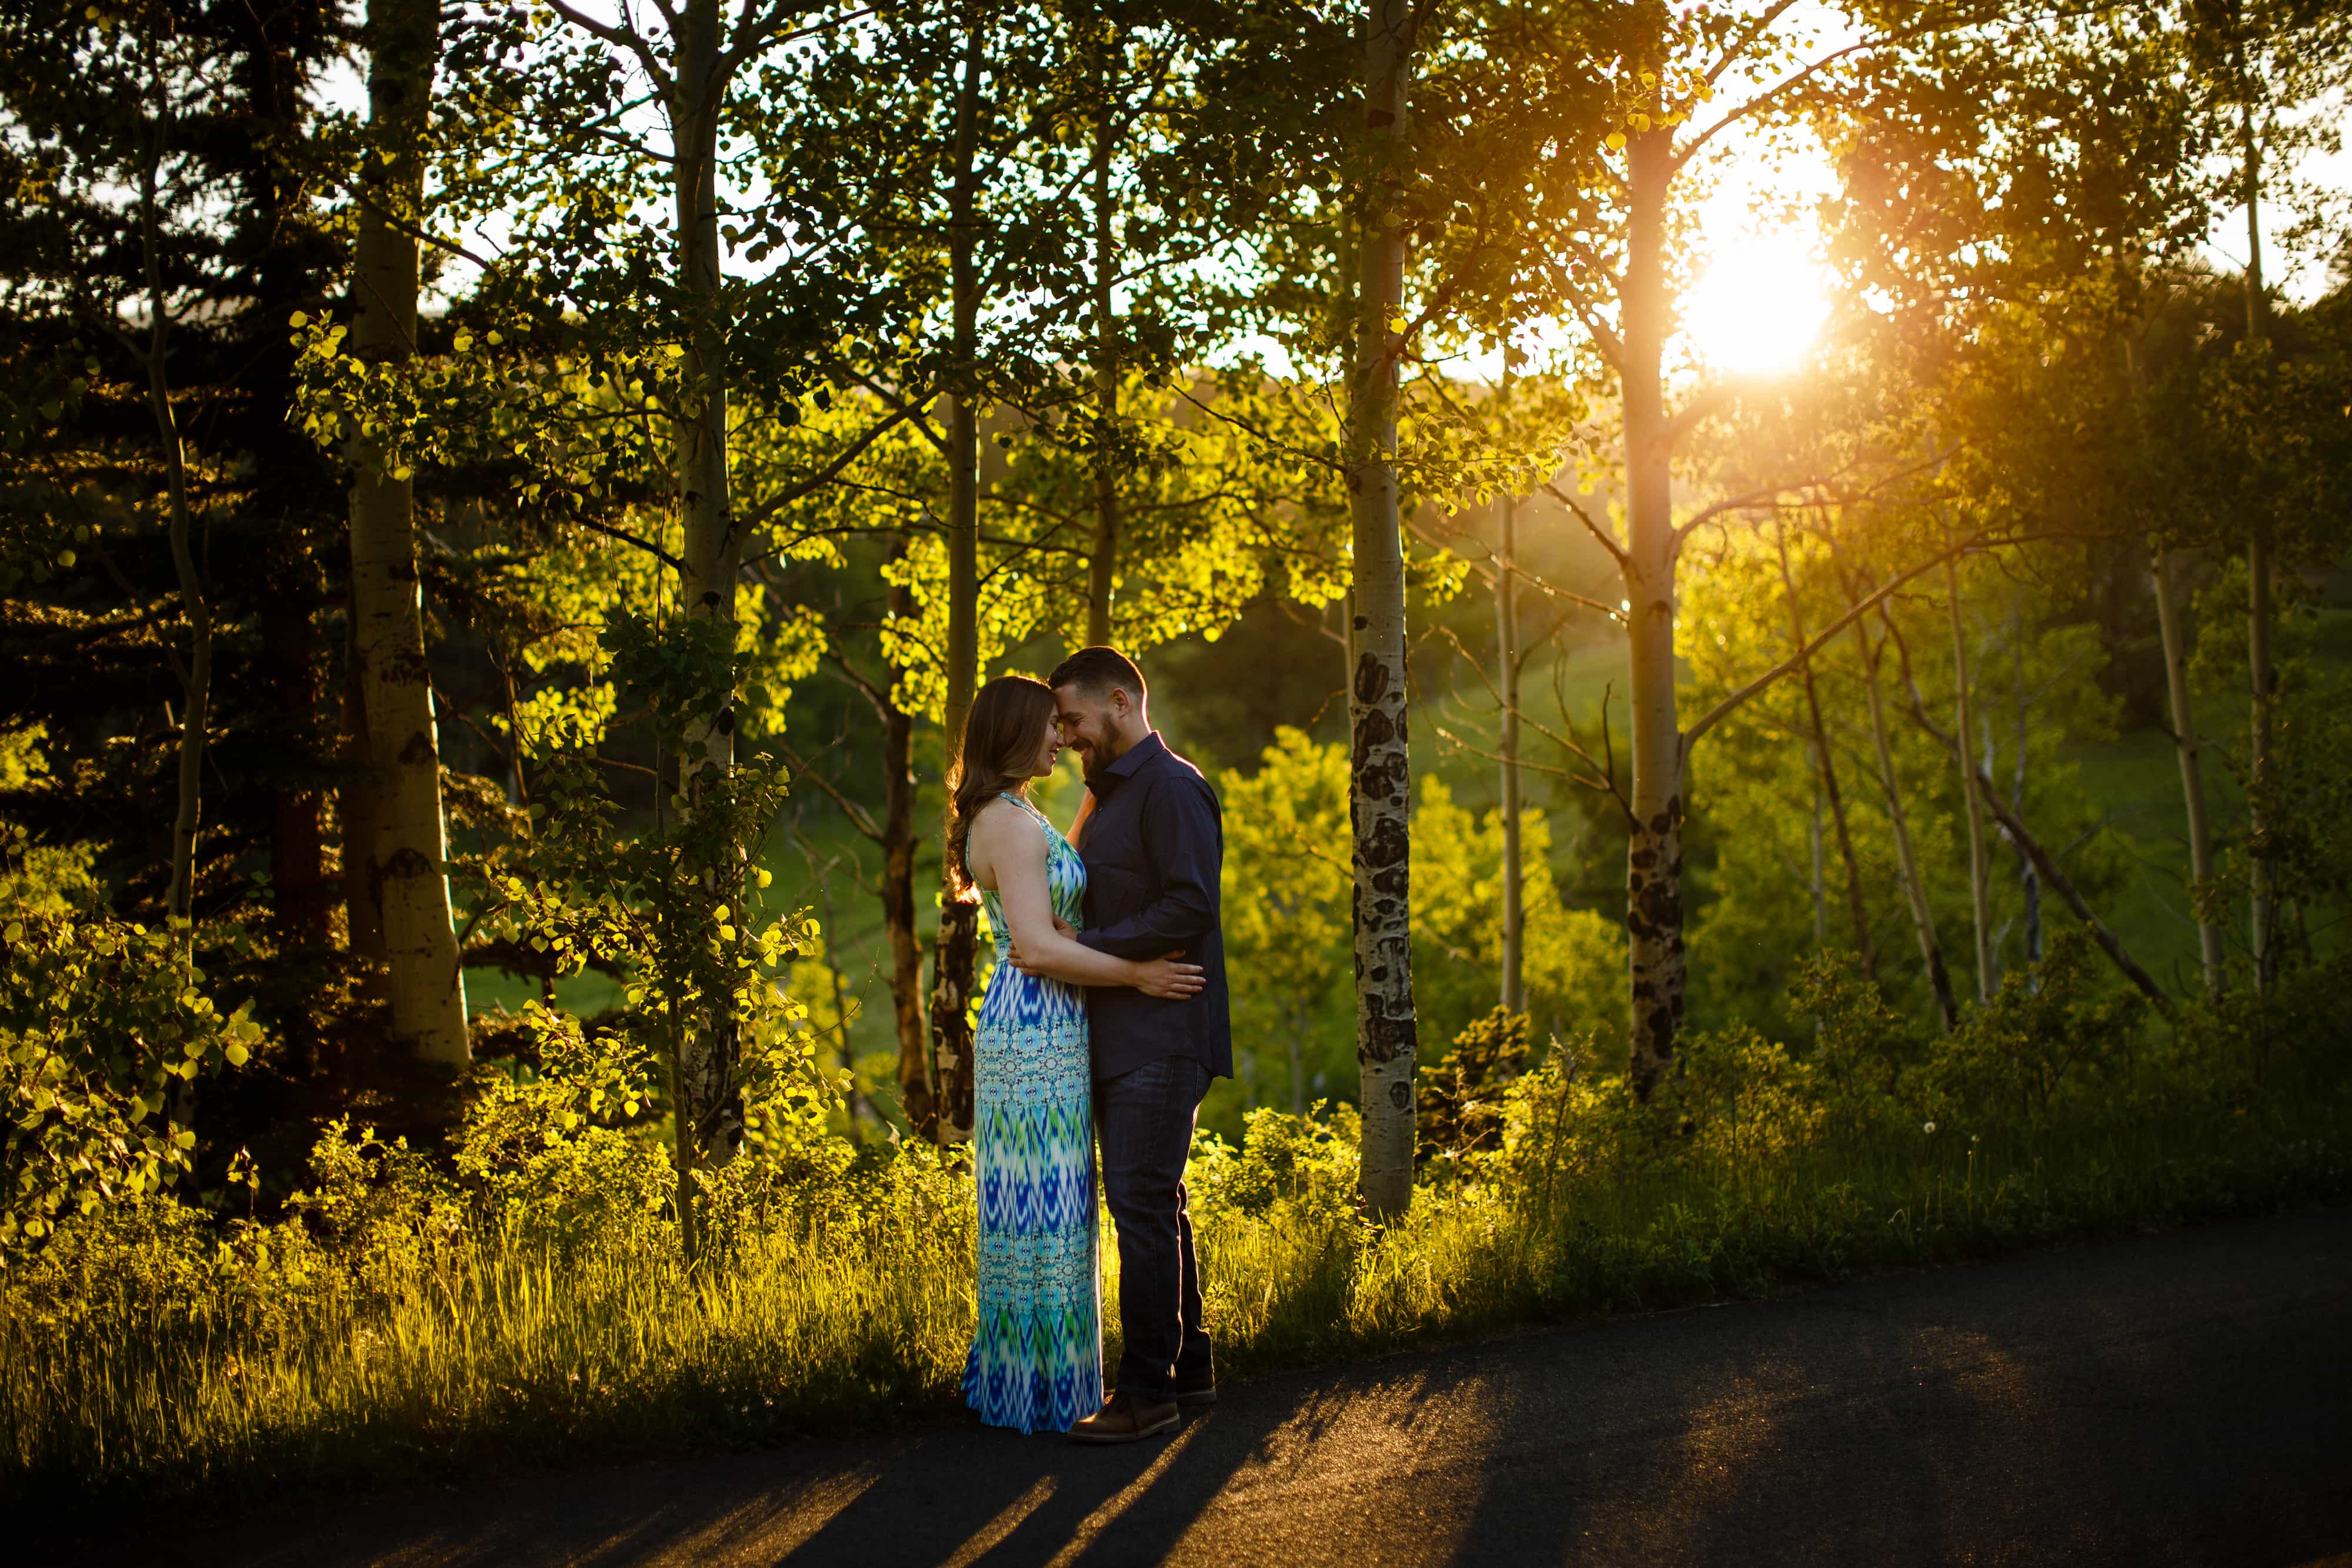 Sharon and Nick share a moment on Mountain Base Road during their colorful engagement in Golden Gate Canyon State Park